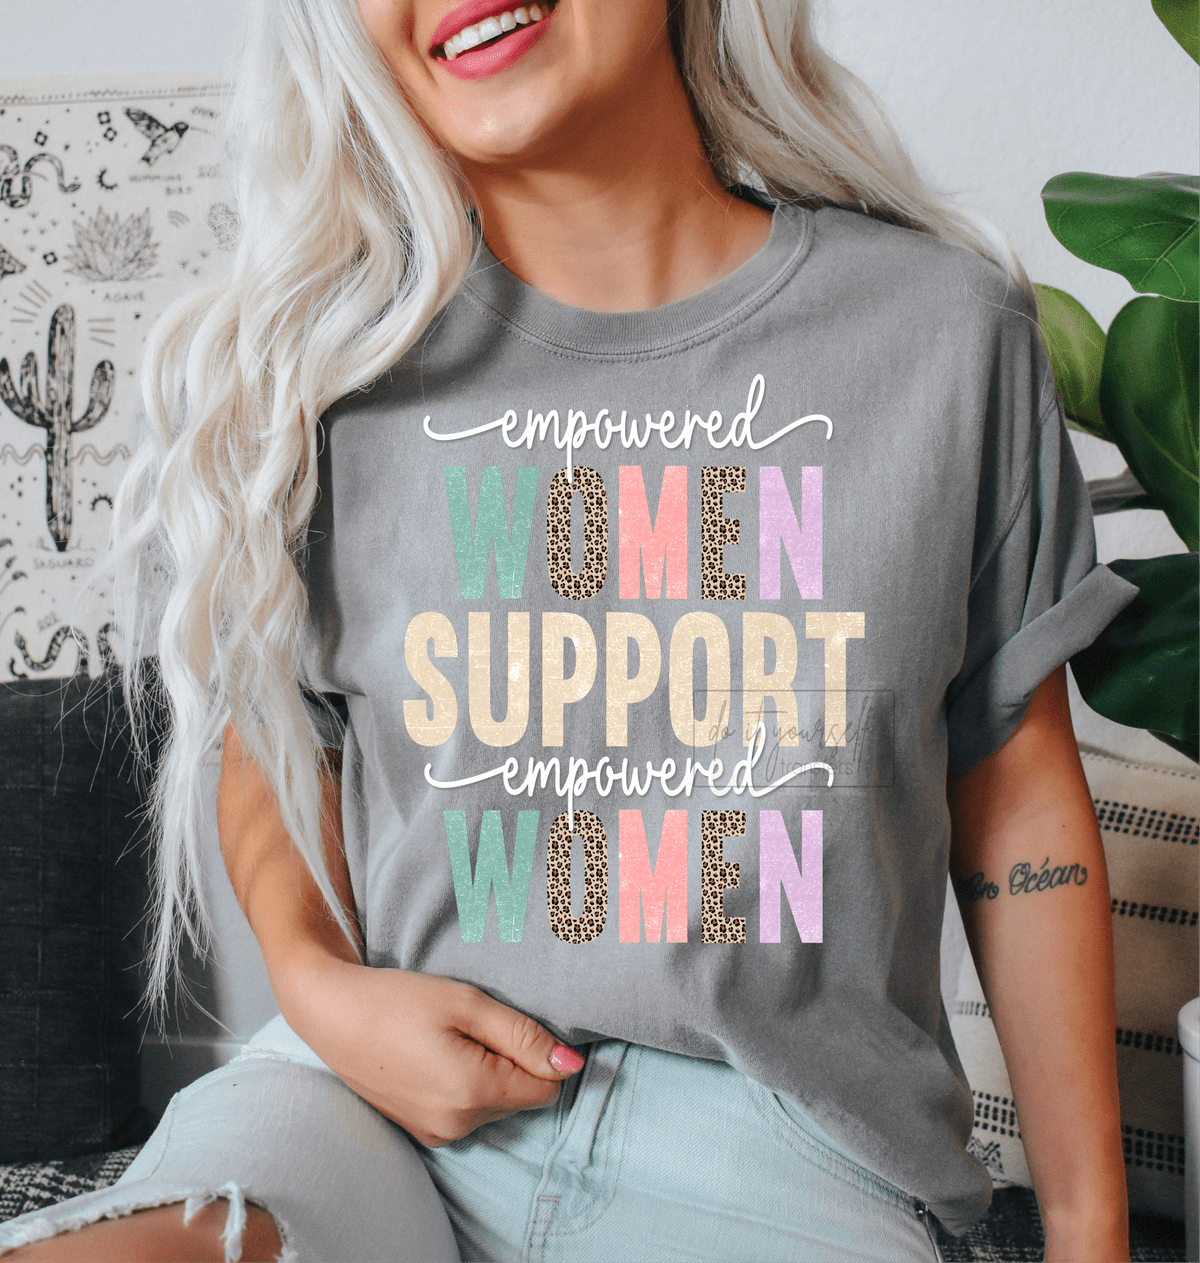 Empowered Women Support Empowered Women size DTF TRANSFERPRINT TO ORDER - Do it yourself Transfers